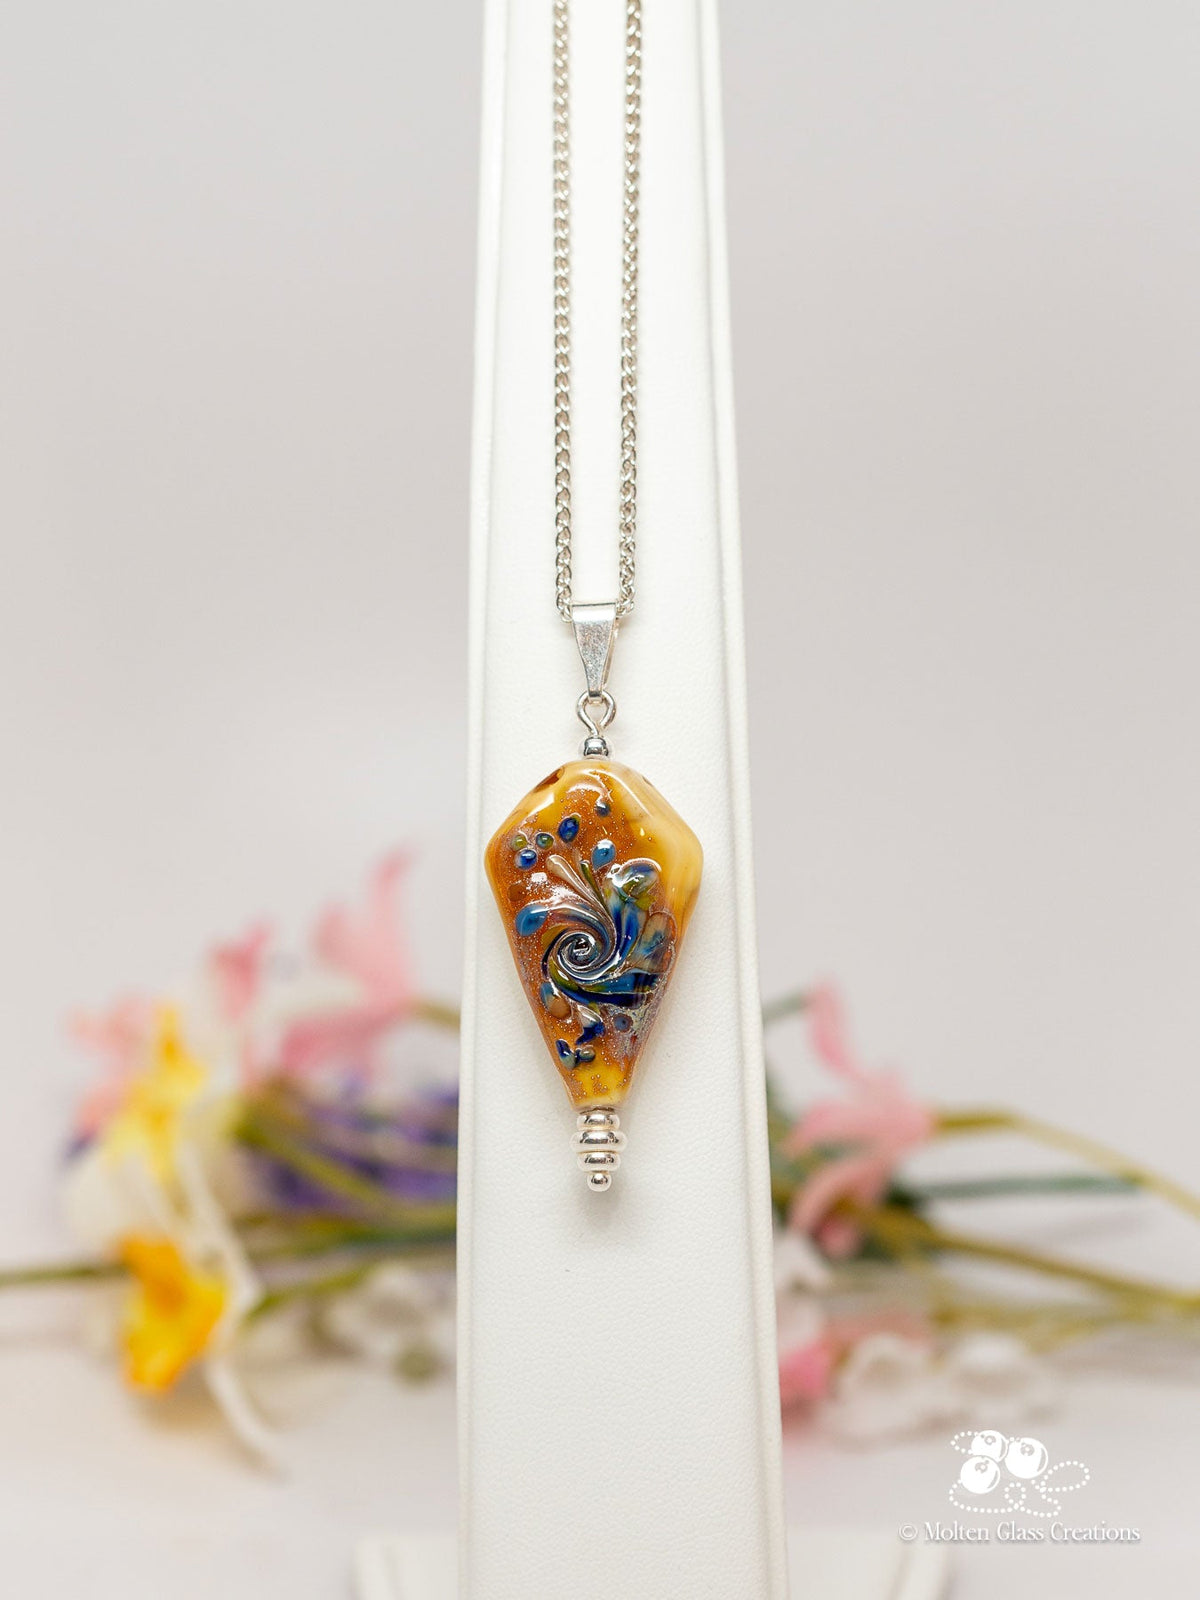 Fly a Kite - Yellow Necklace - Molten Glass Creations